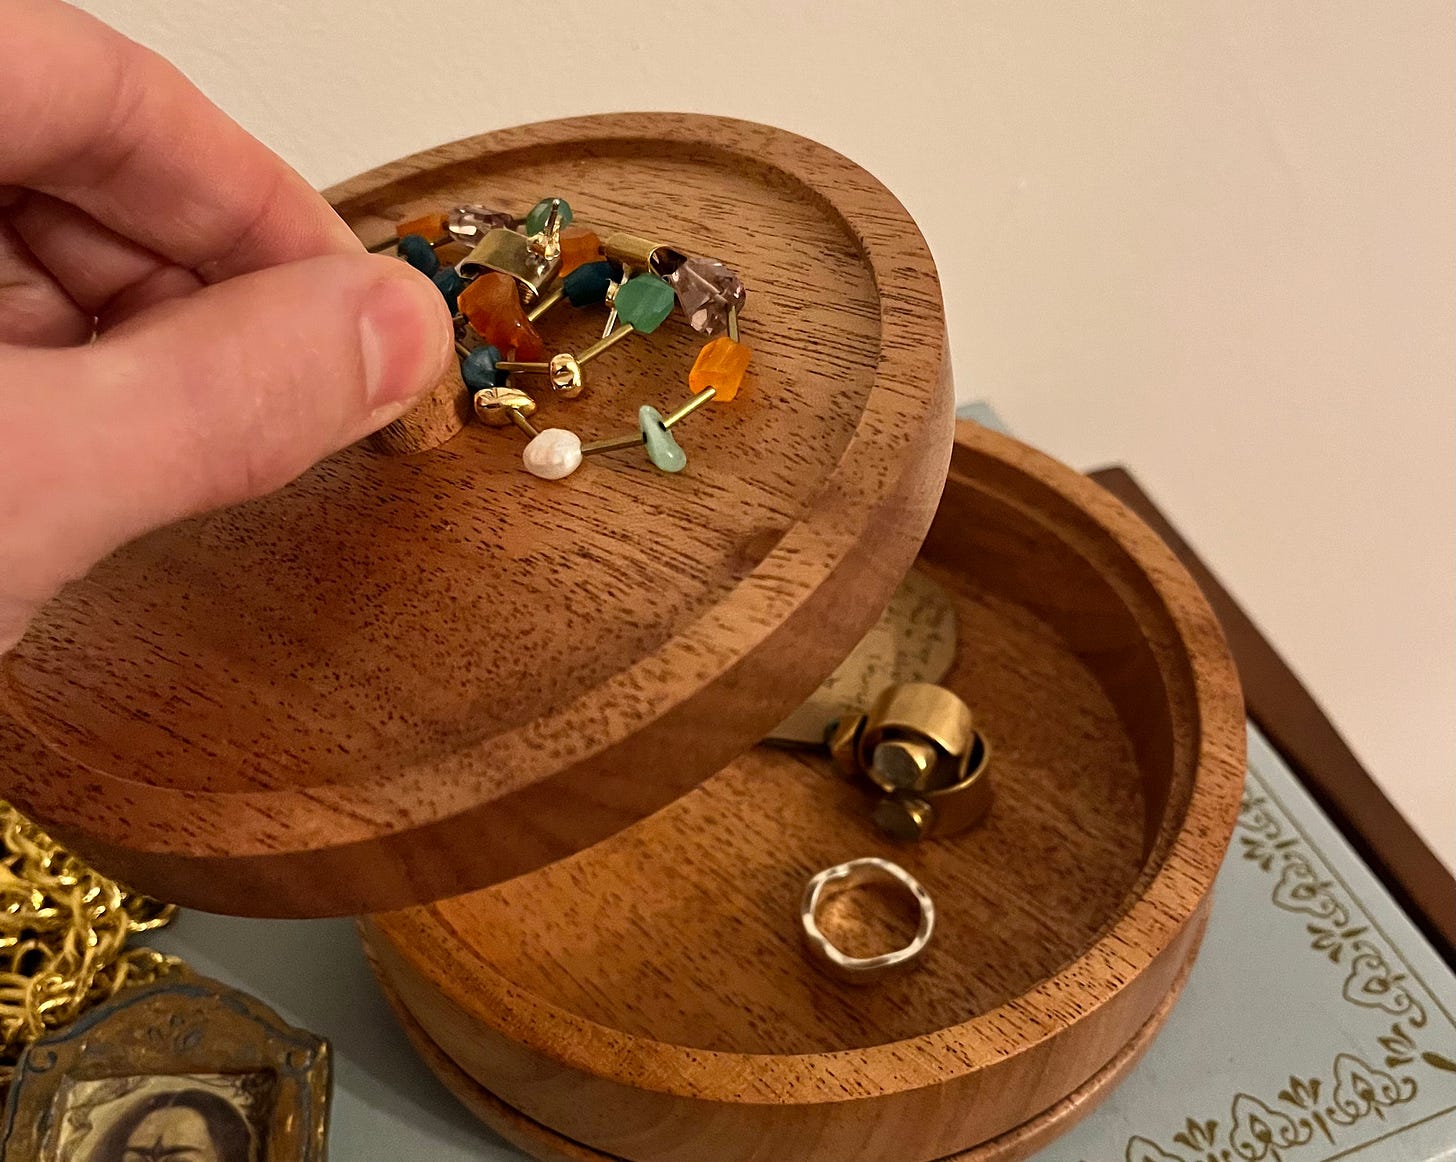 Box with colourful earrings on top, a hand removing the lid to reveal more jewellery inside.